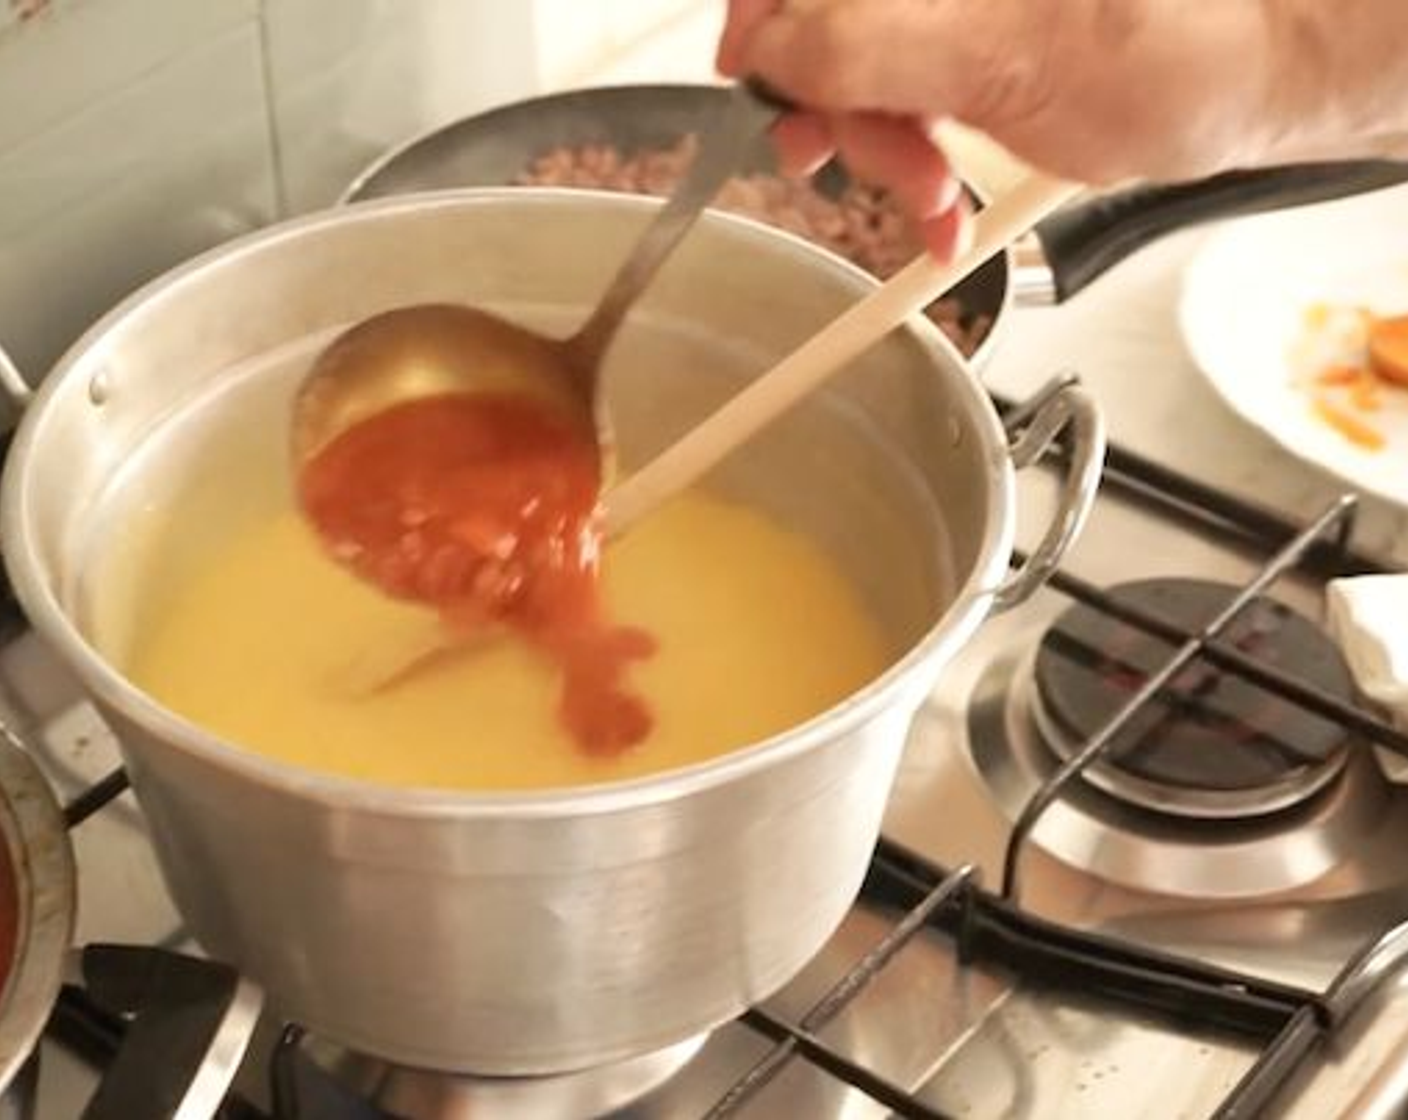 step 9 Using a ladle, pour a portion of the sauce you prepared earlier, into the cornmeal polenta, and mix it through. At the same time add half of the sausage mince you also prepared and stir it in.